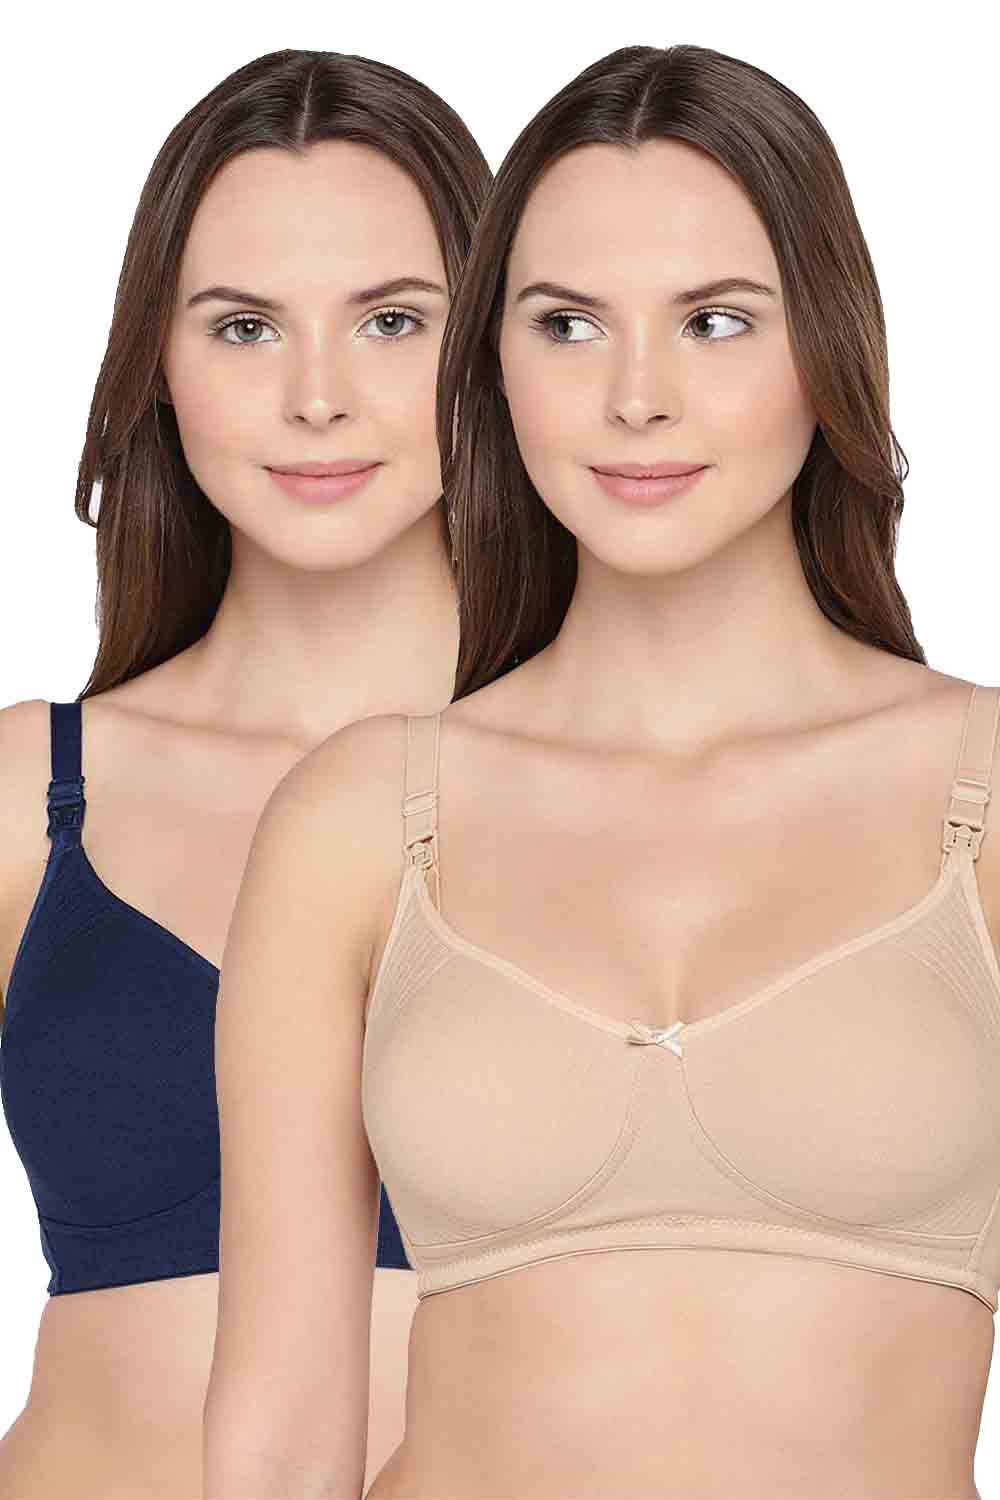 36E padded bra - 35 products